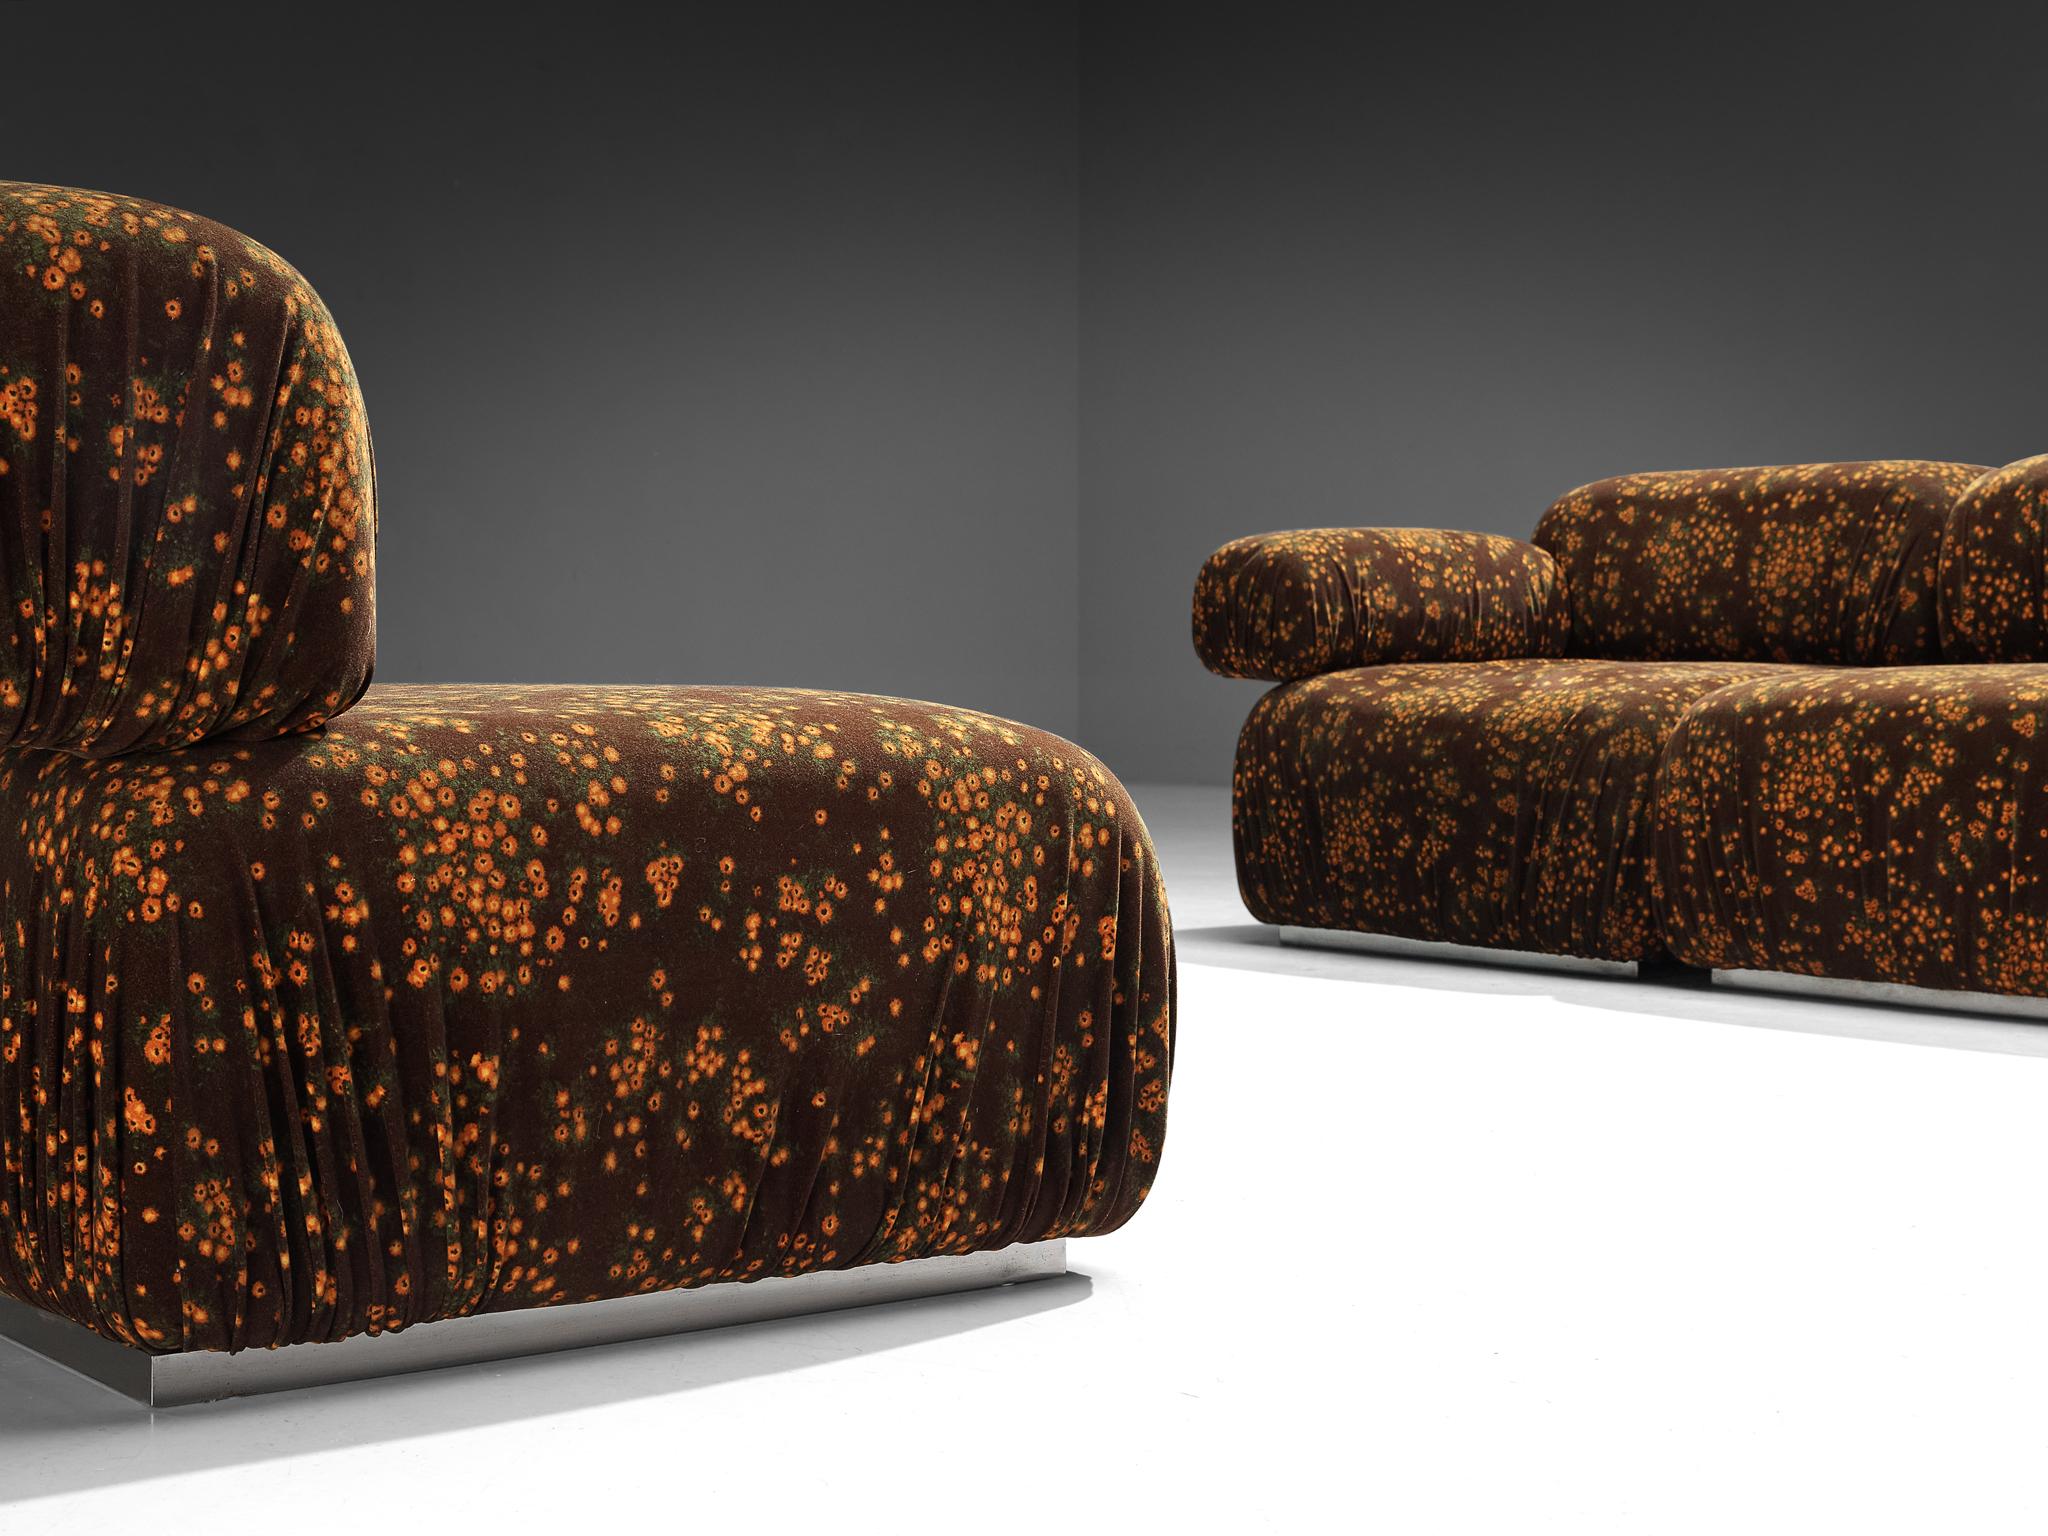 Post-Modern Roberto Iera for Felicerossi Large Sectional Sofa in Retro Flower Upholstery